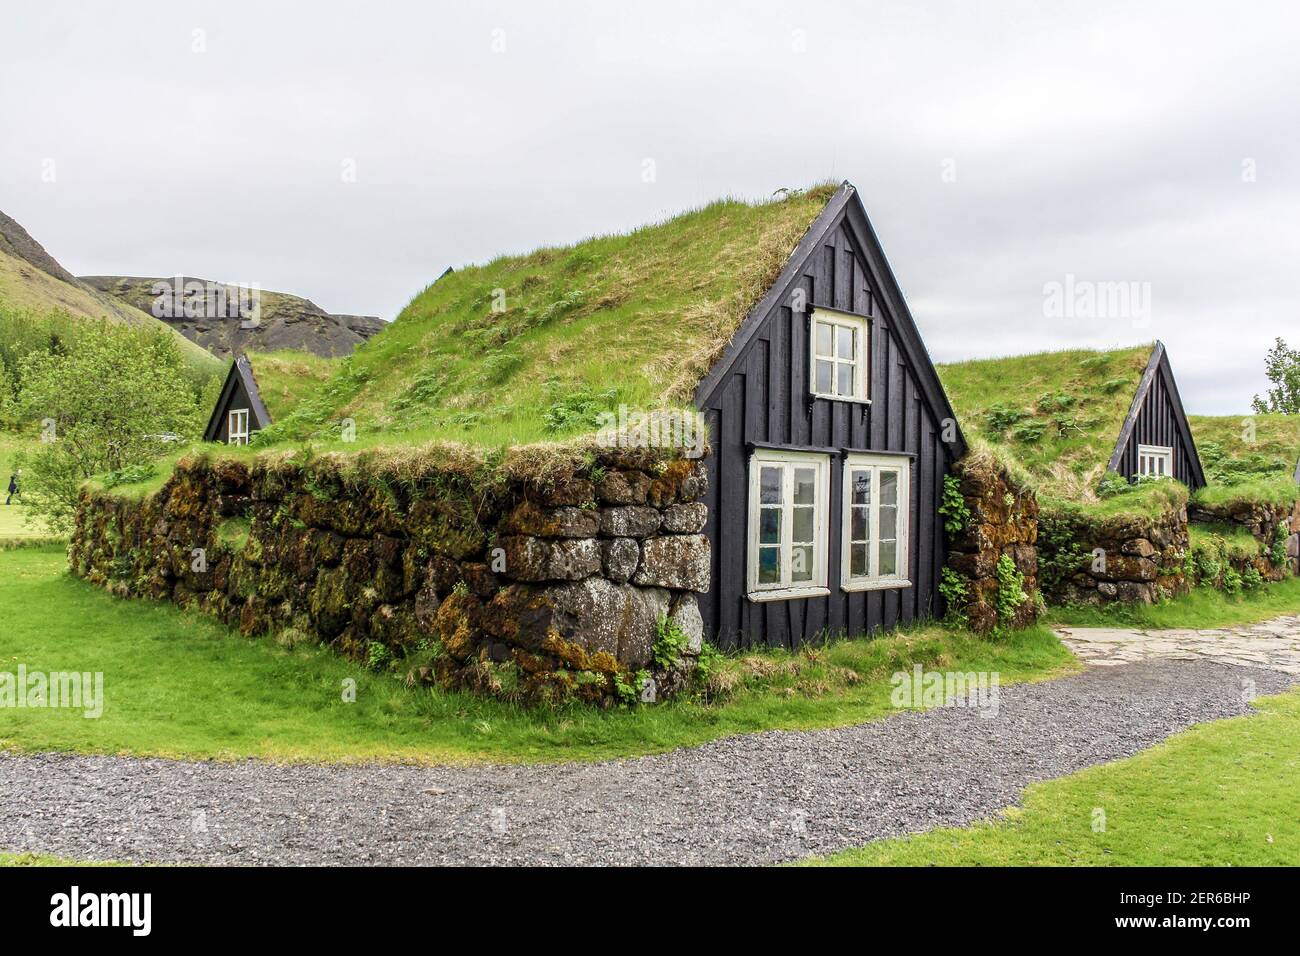 Turf houses built in traditional manner, South Iceland Stock Photo